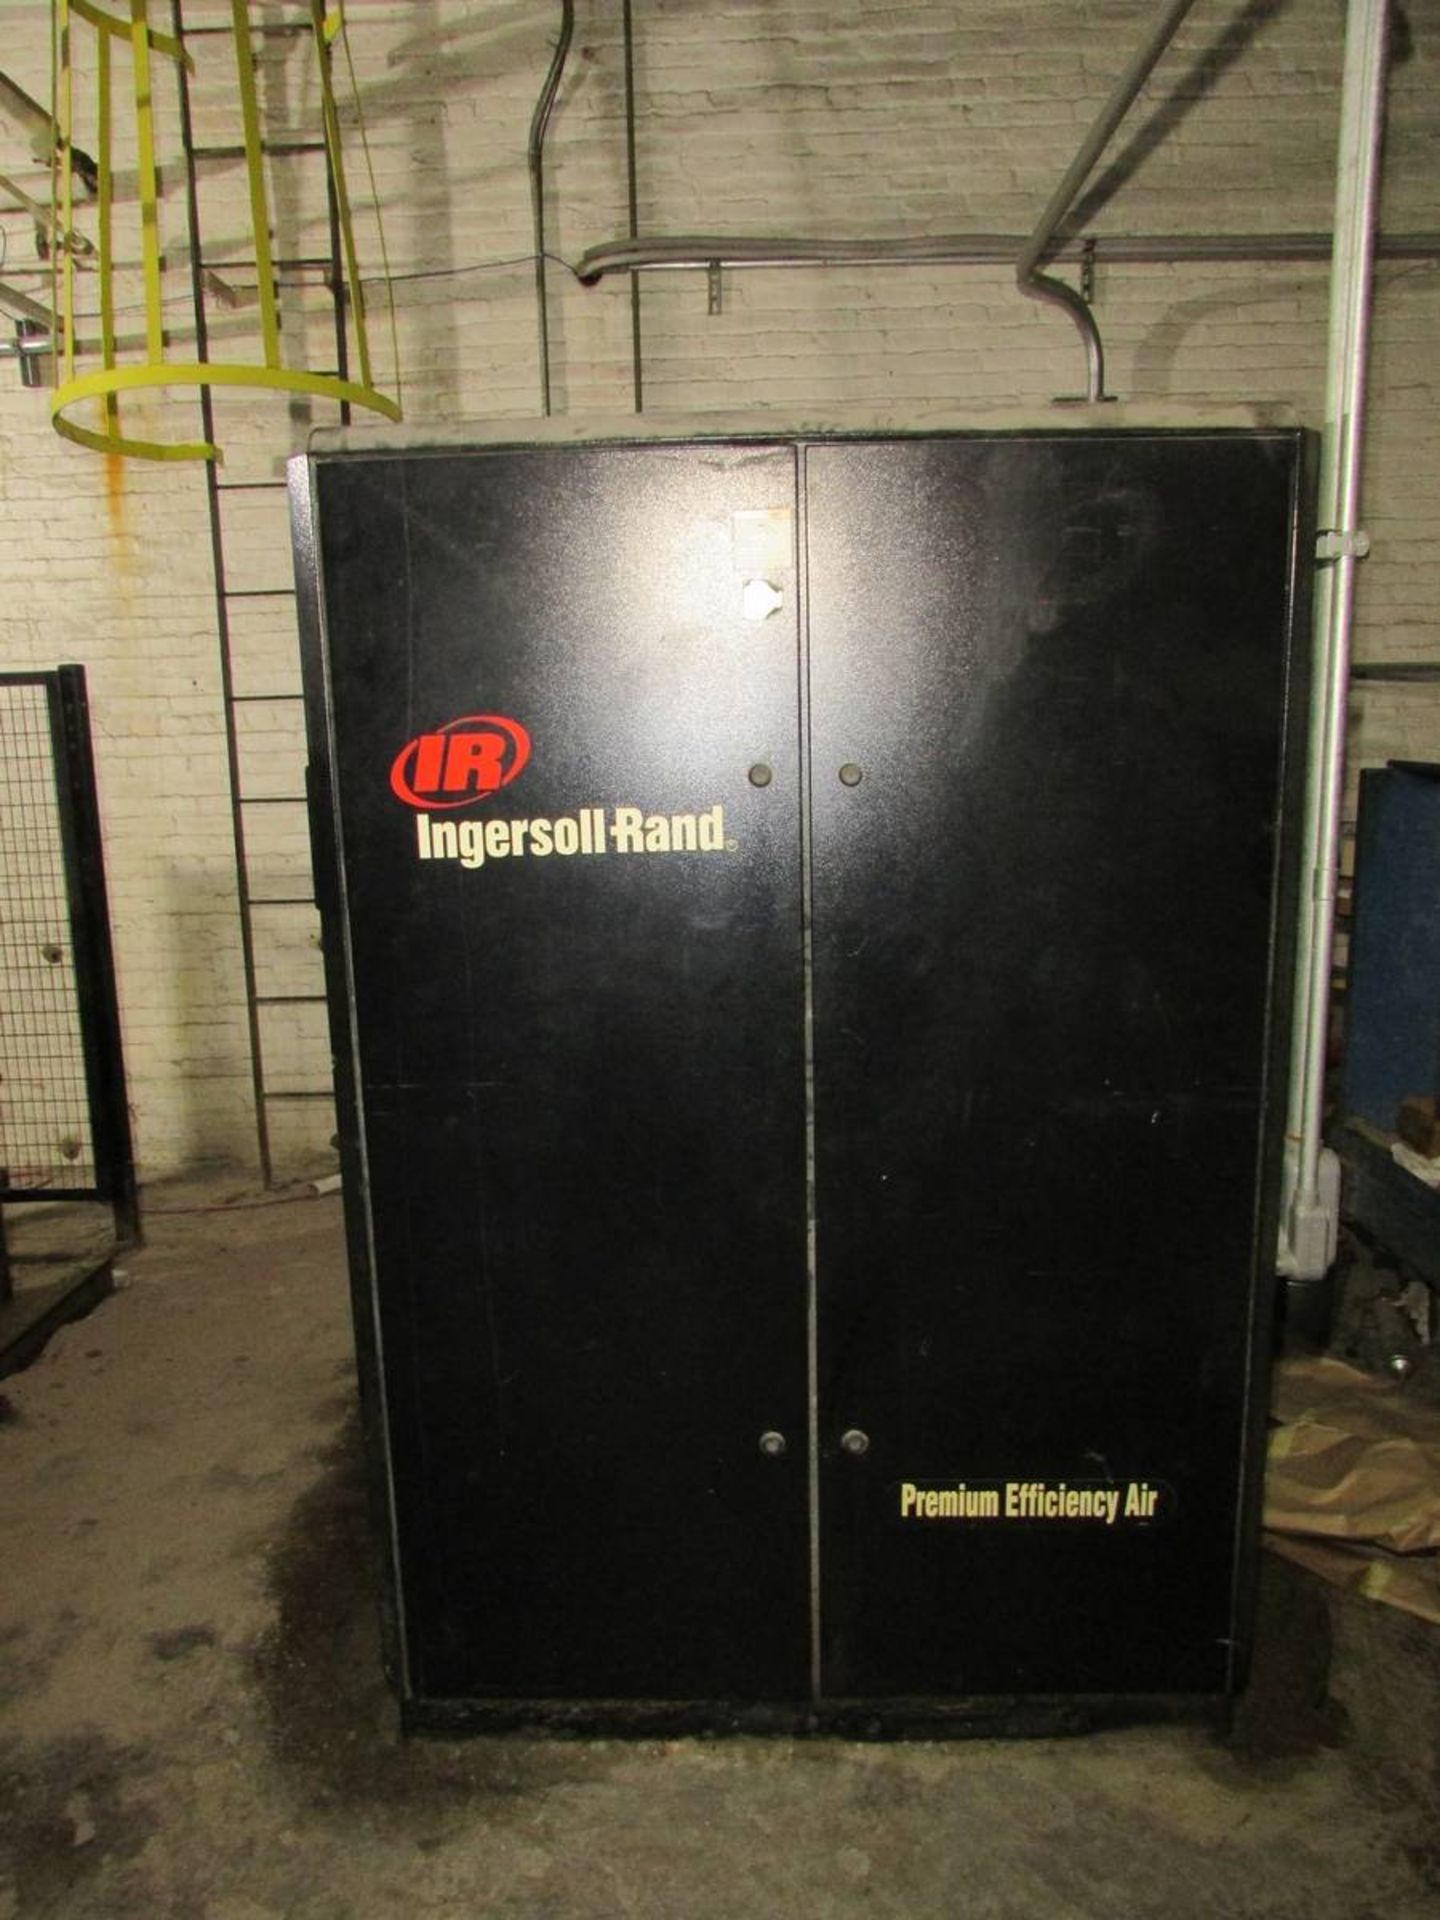 Ingersoll-Rand IRN100H-CC 100 HP Rotary Screw Air Compressor - Image 3 of 8